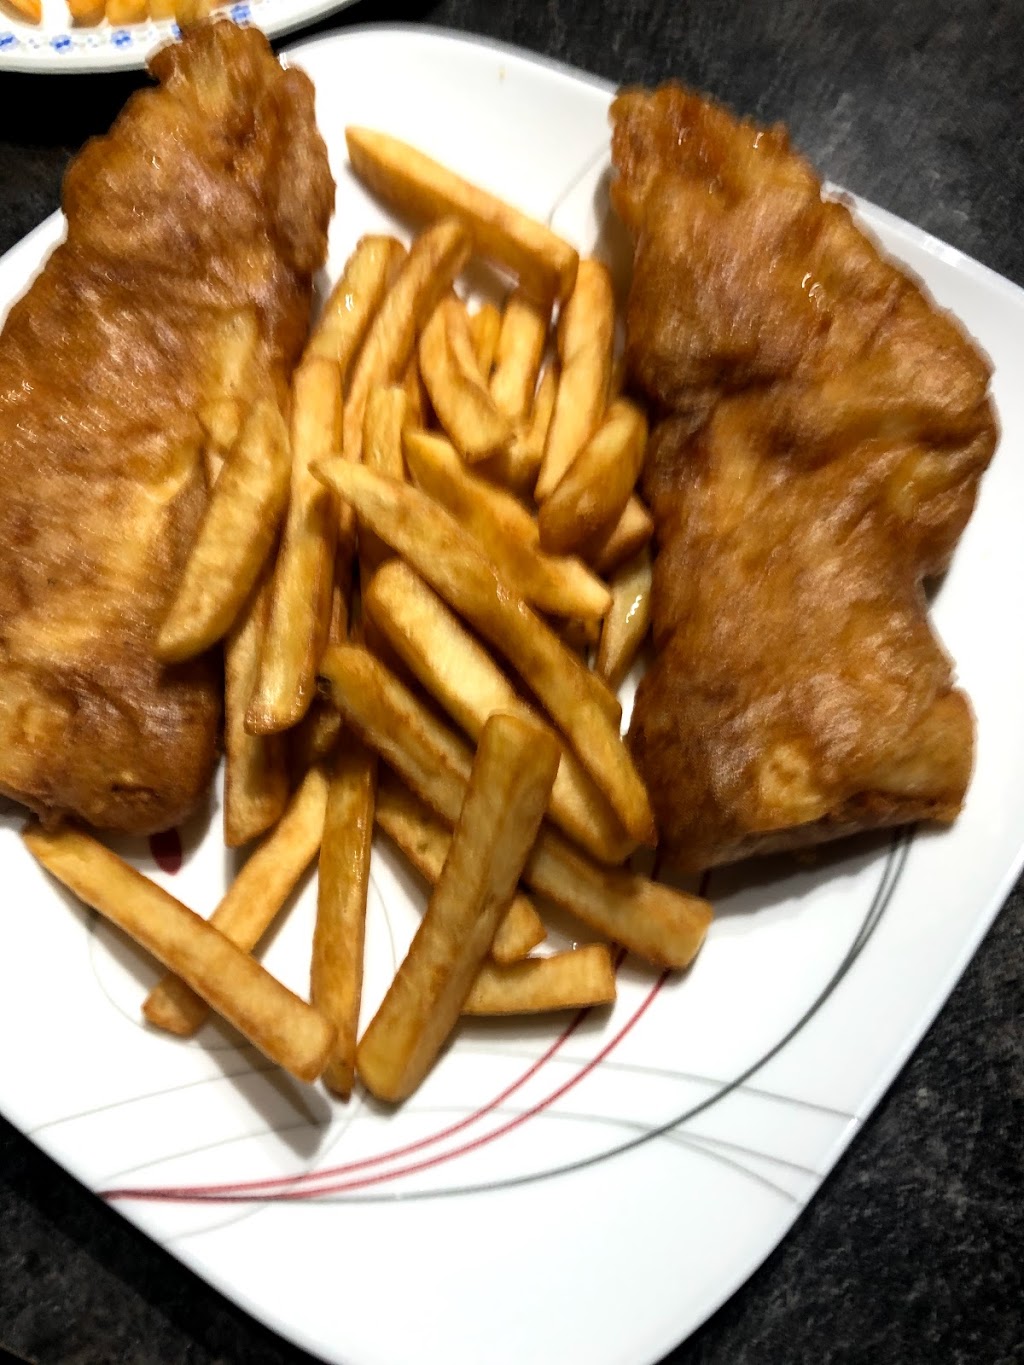 Thorold Fish and Chips | meal takeaway | 46 Front St N, Thorold, ON L2V 1X5, Canada | 9056802318 OR +1 905-680-2318